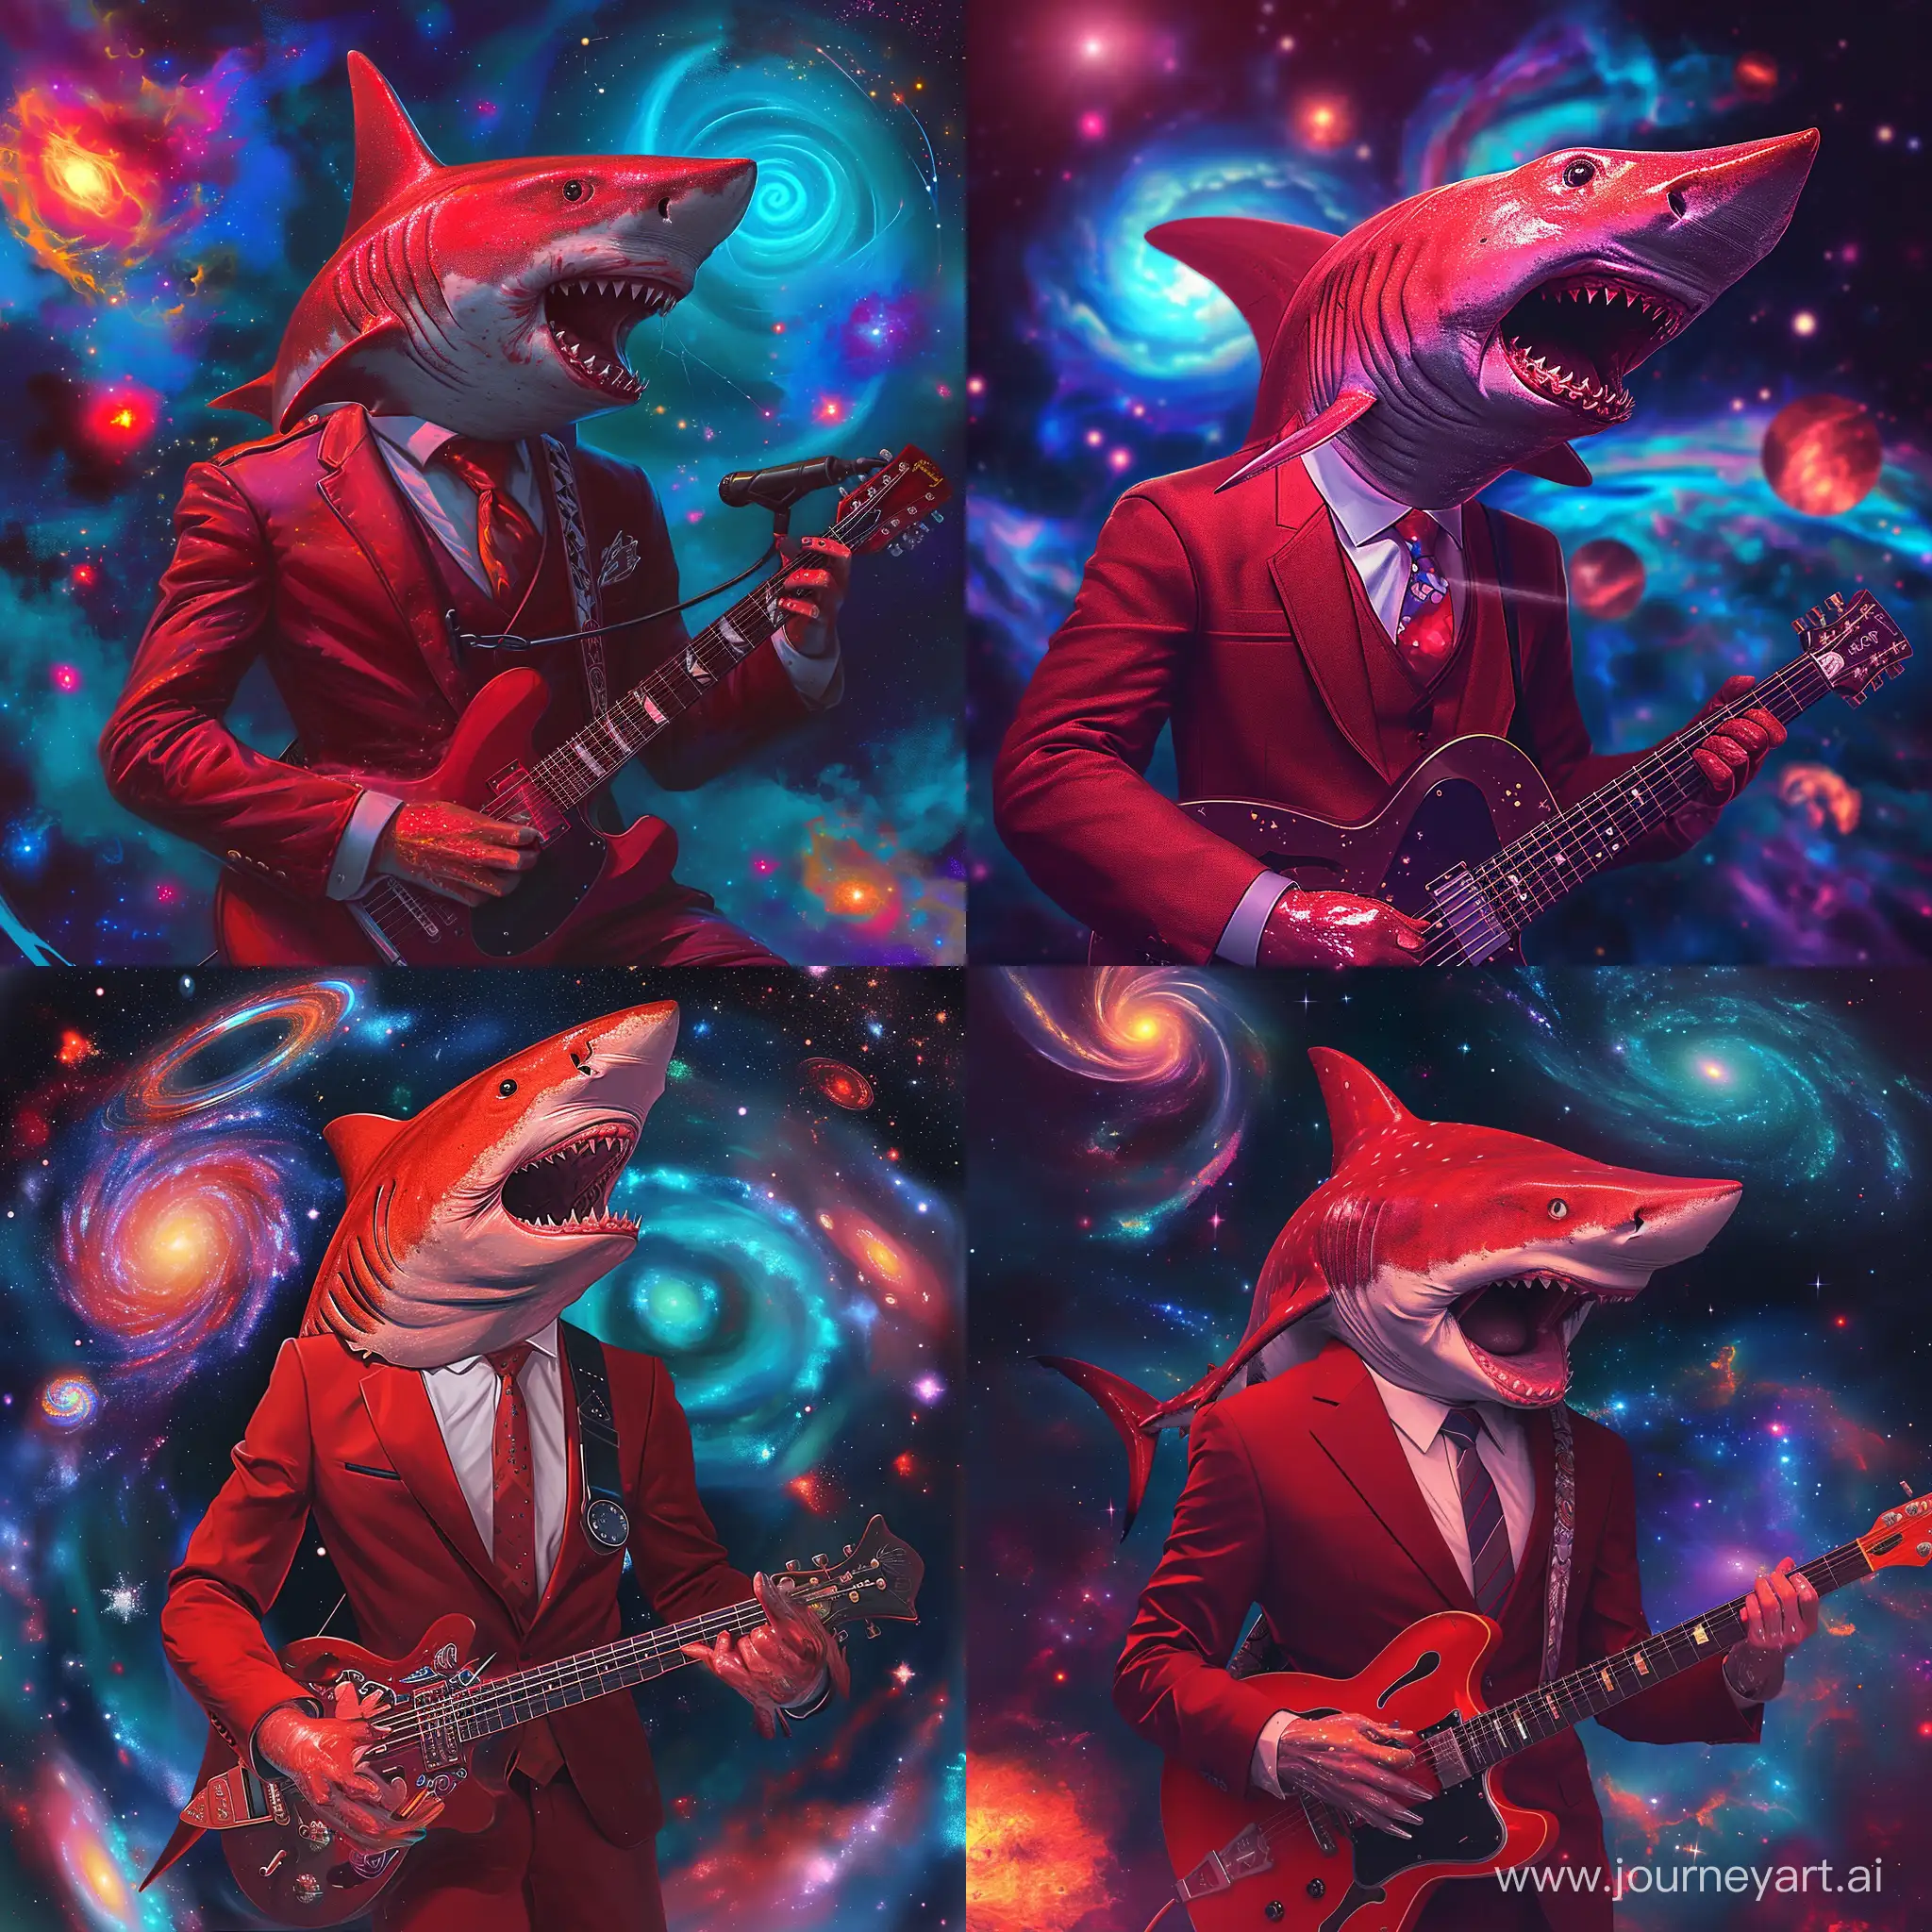 realistic humanoid red shark, mesmerizing vibrant detailed face, exaggerated shark face, singing, wearing a sophisticated red business outfit, such as a tailored suit with a crisp white shirt and a statement tie, looking dapper and professional. The shark should be shown playing guitar, with cosmic elements in the background such as swirling galaxies, stars, nebulae, surreal and awe-inspiring setting, The overall atmosphere should convey creativity, power, touch of mystique, great lighting, heavy head, high detailed head, opened-mouth, vibrant pose, main red theme, masterpiece, Midnight blue cosmos, purple cosmos, lens-flare, neon lights, cosmical exploaion, overwhelming in cosmos --q 4